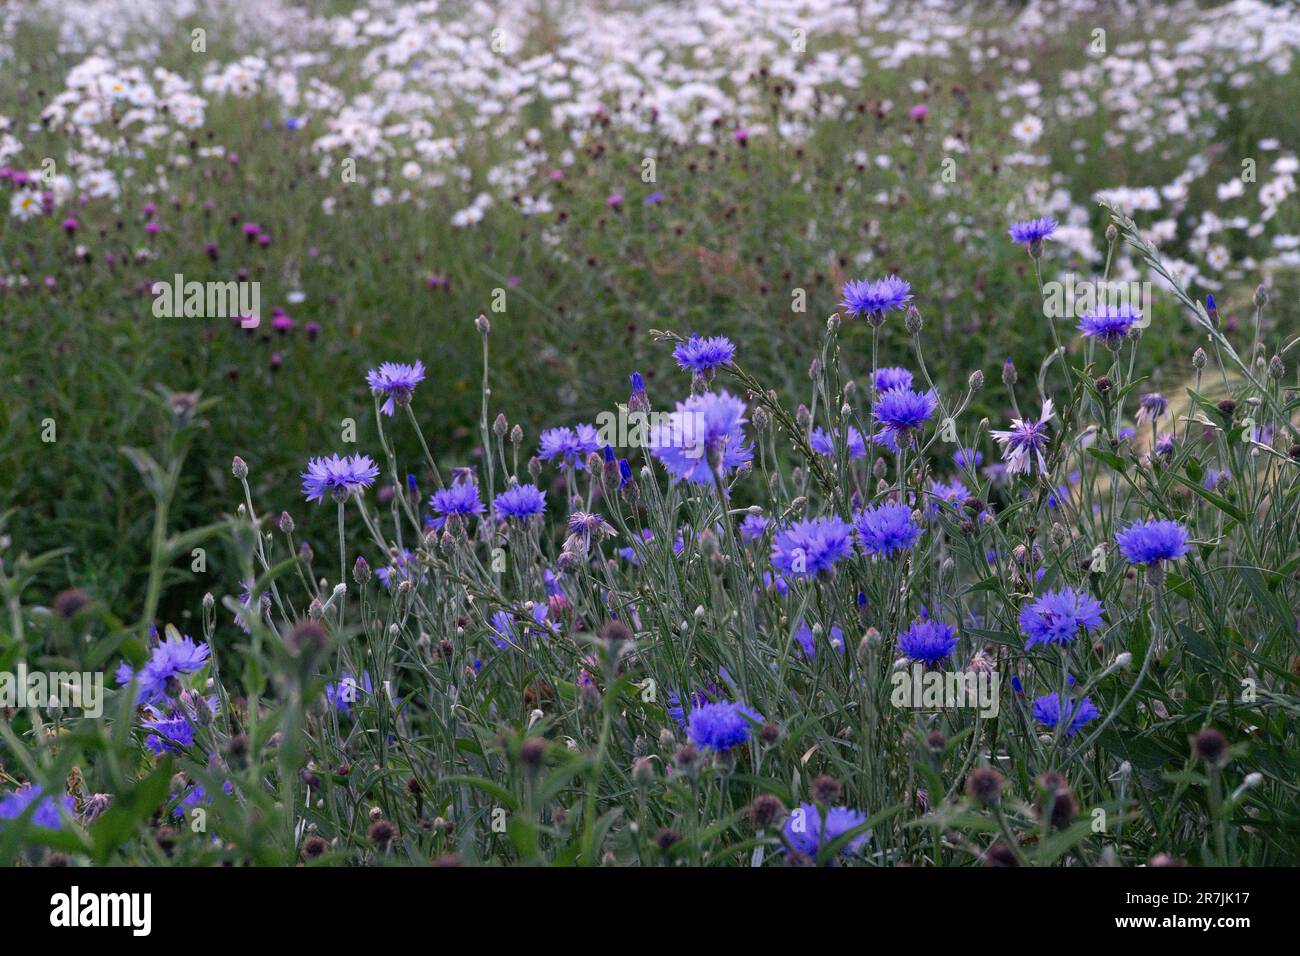 London, UK, 15 June 20232: On Clapham Common an area has been planted as a wildflower meadow. At sunset the cornflowers, thistles and ox-eye daisies catch the last glowing light as dusk sets in. Anna Watson/Alamy Live News Stock Photo